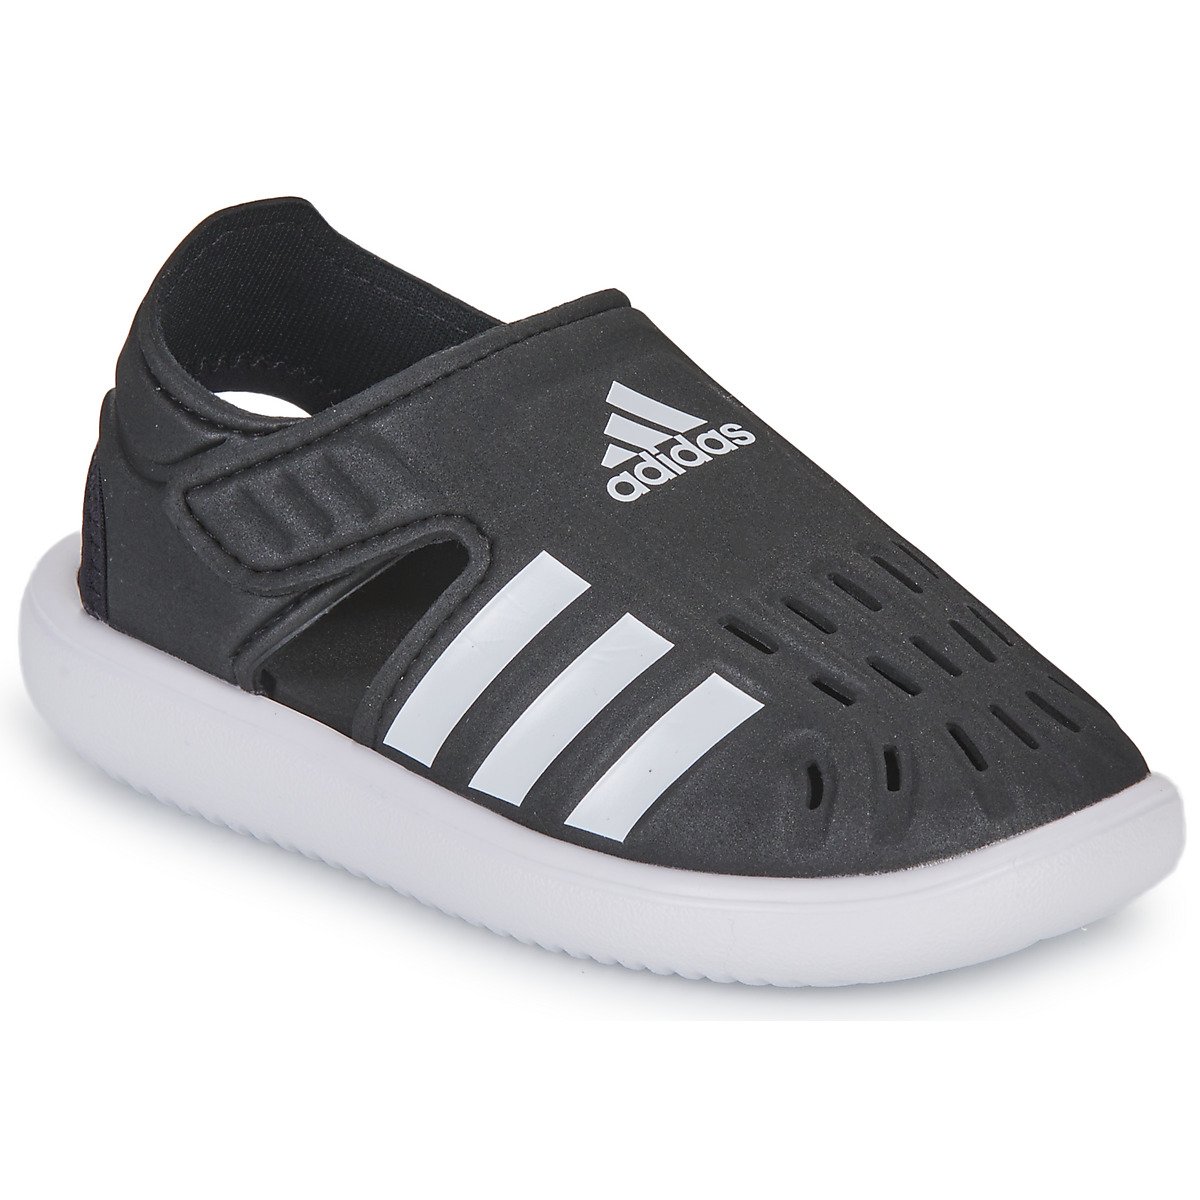 Xαμηλά Sneakers adidas WATER SANDAL I